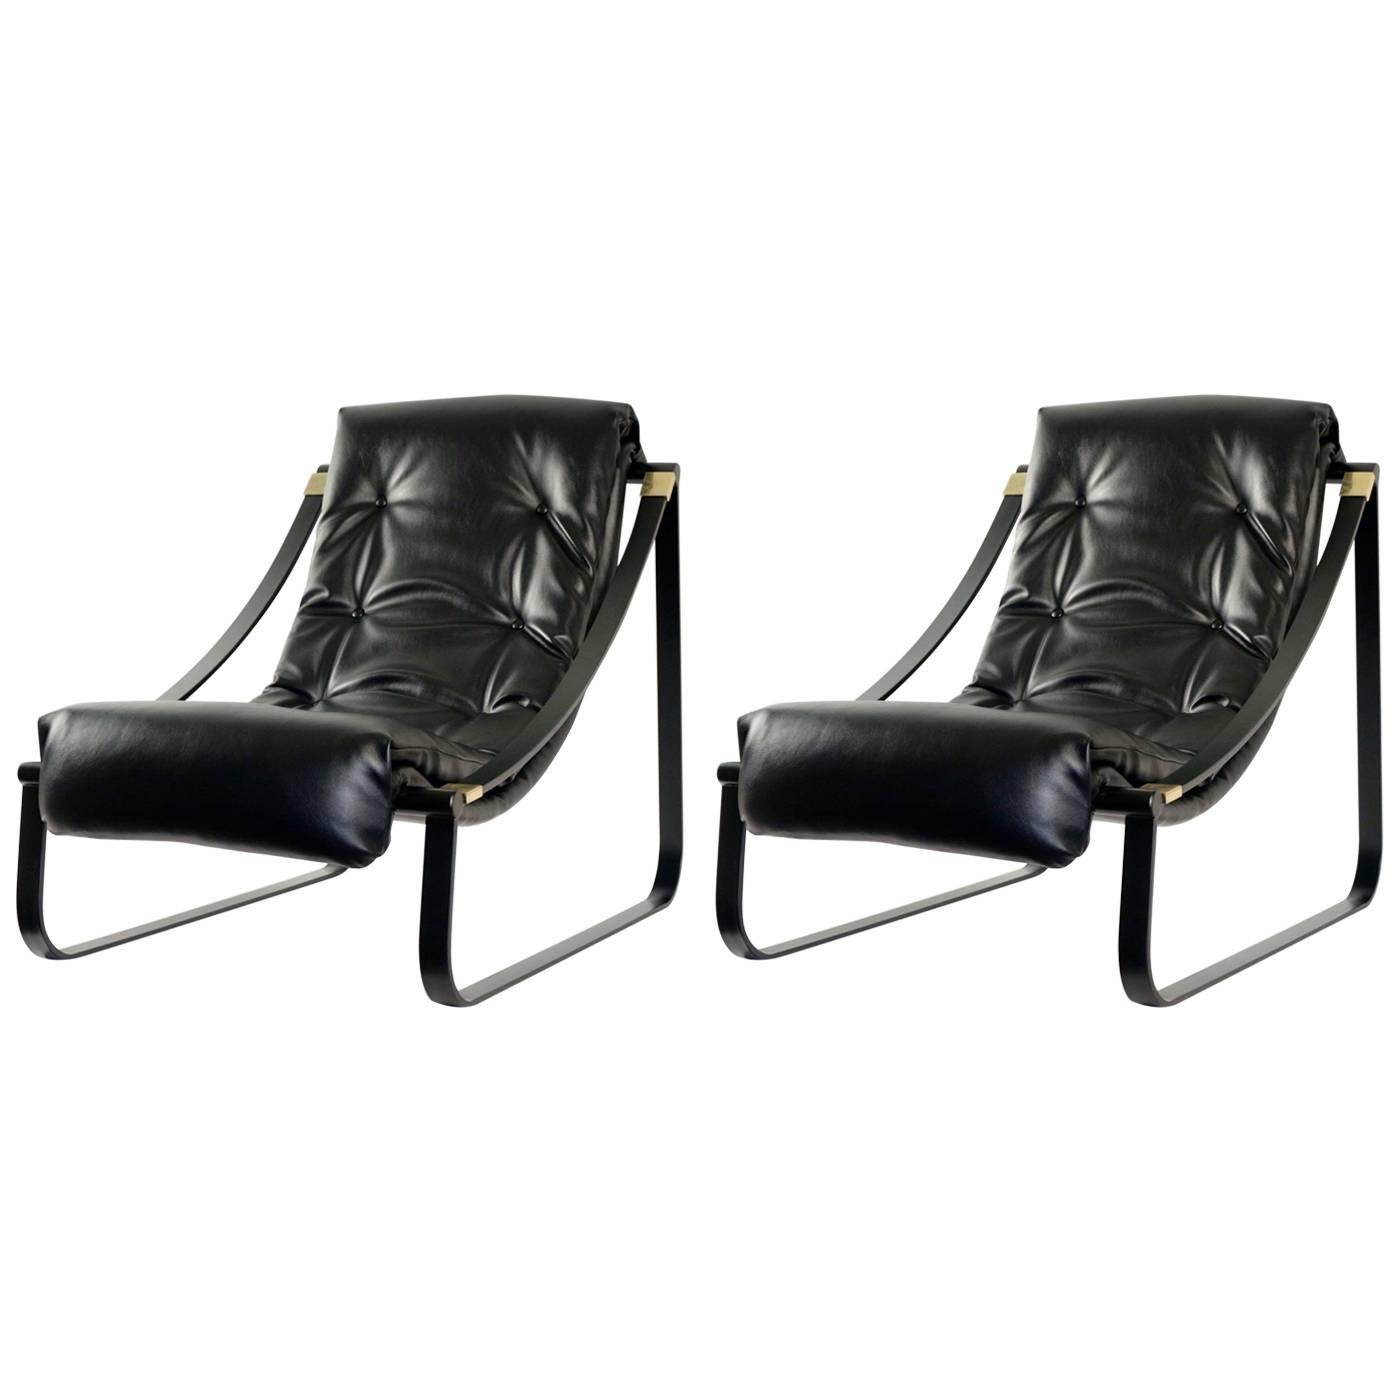 1970s Pair of Black Lounge Chairs